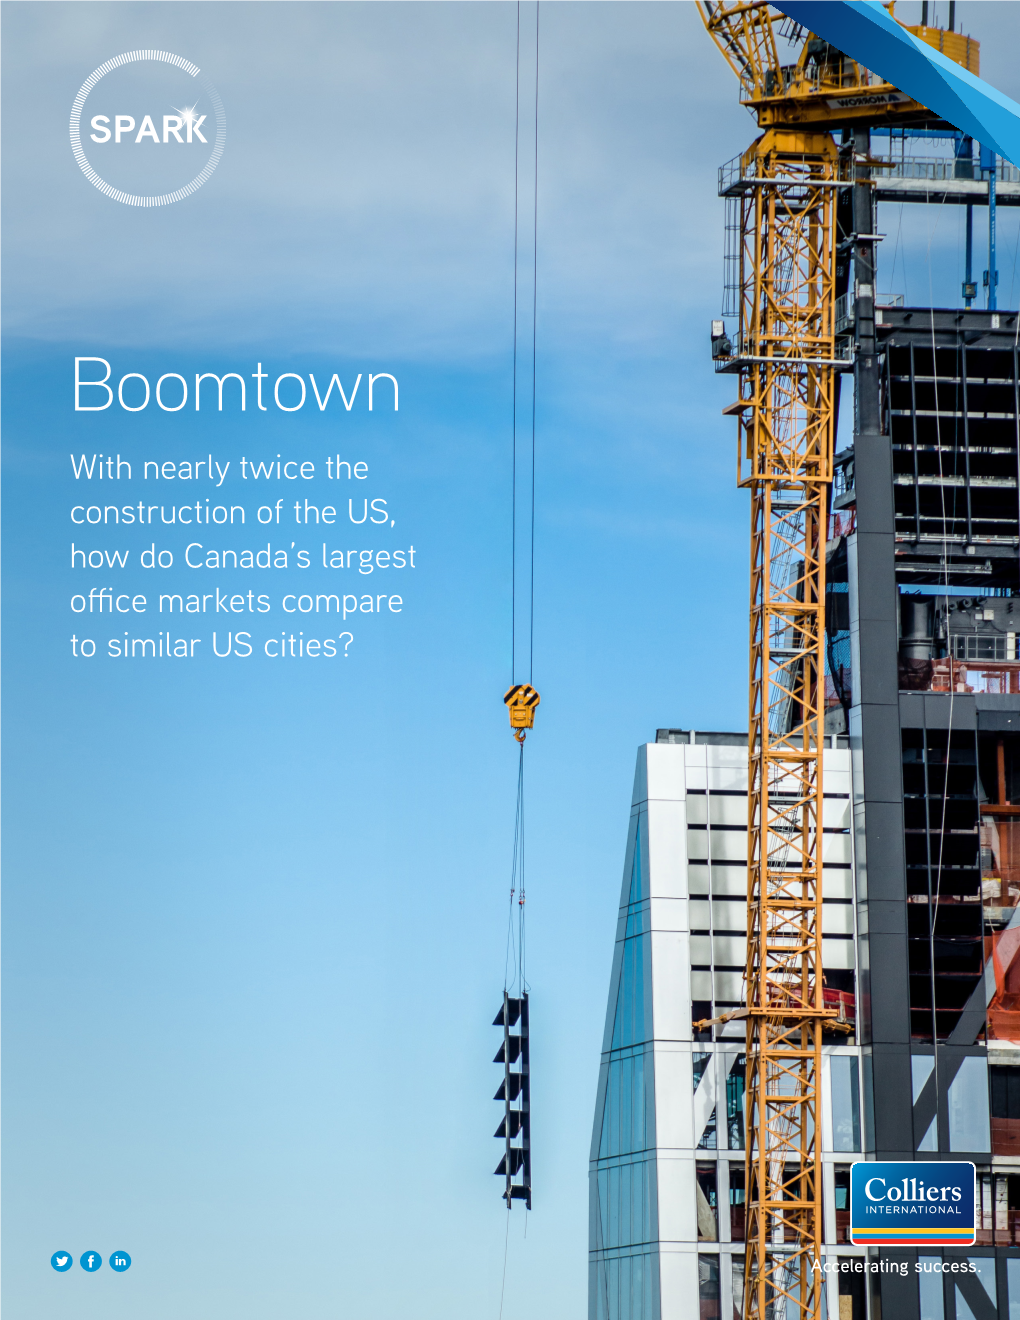 Boomtown with Nearly Twice the Construction of the US, How Do Canada’S Largest Office Markets Compare to Similar US Cities?